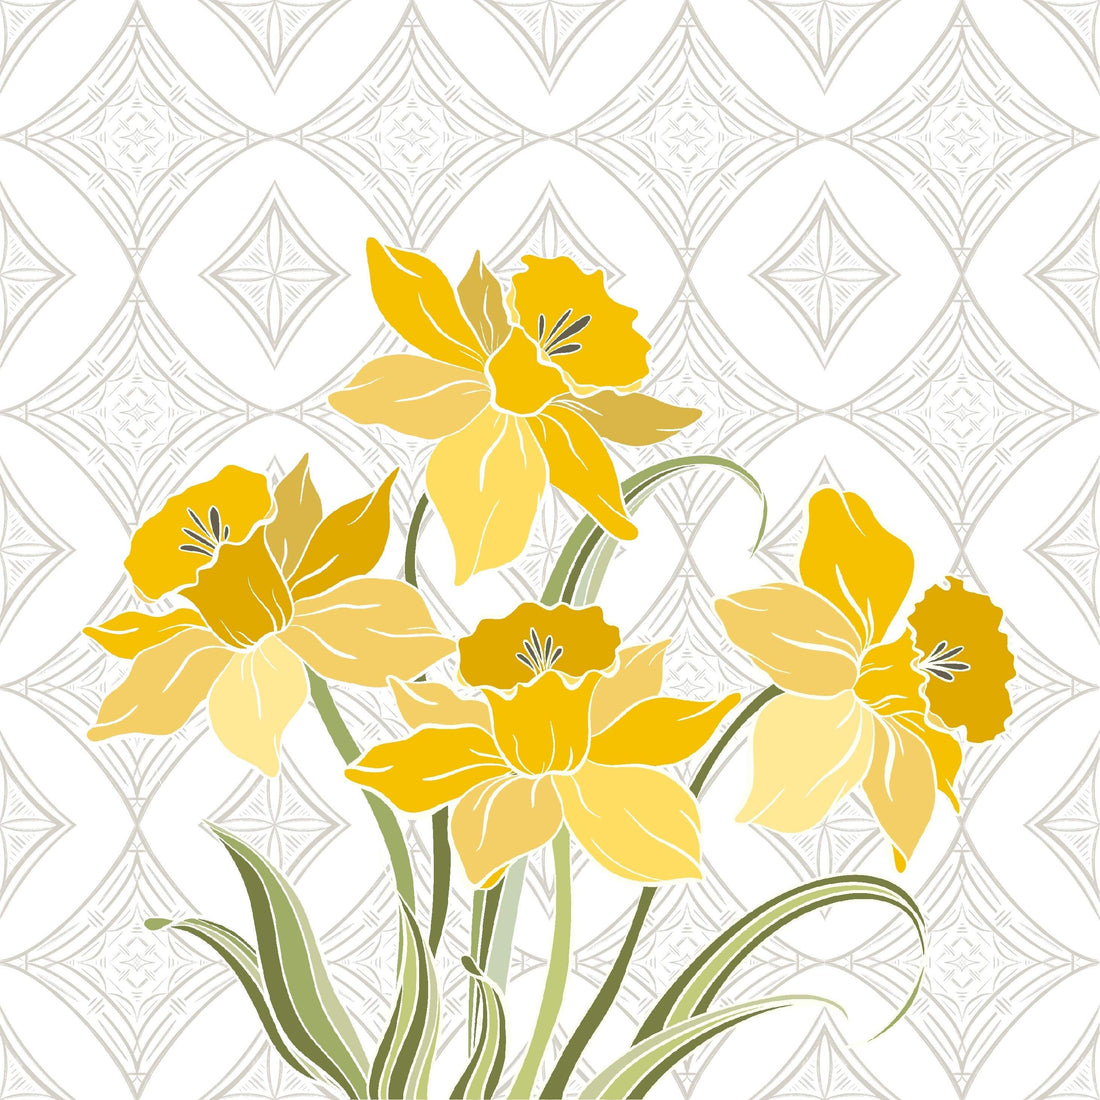 Art Deco Daffodils - Artist by Thistle and Grace - Art Prints, Decoupage Rice Paper, Flat Canvas Prints, Greeting Cards, Photo Prints, Poster Prints, Scrapbook Paper